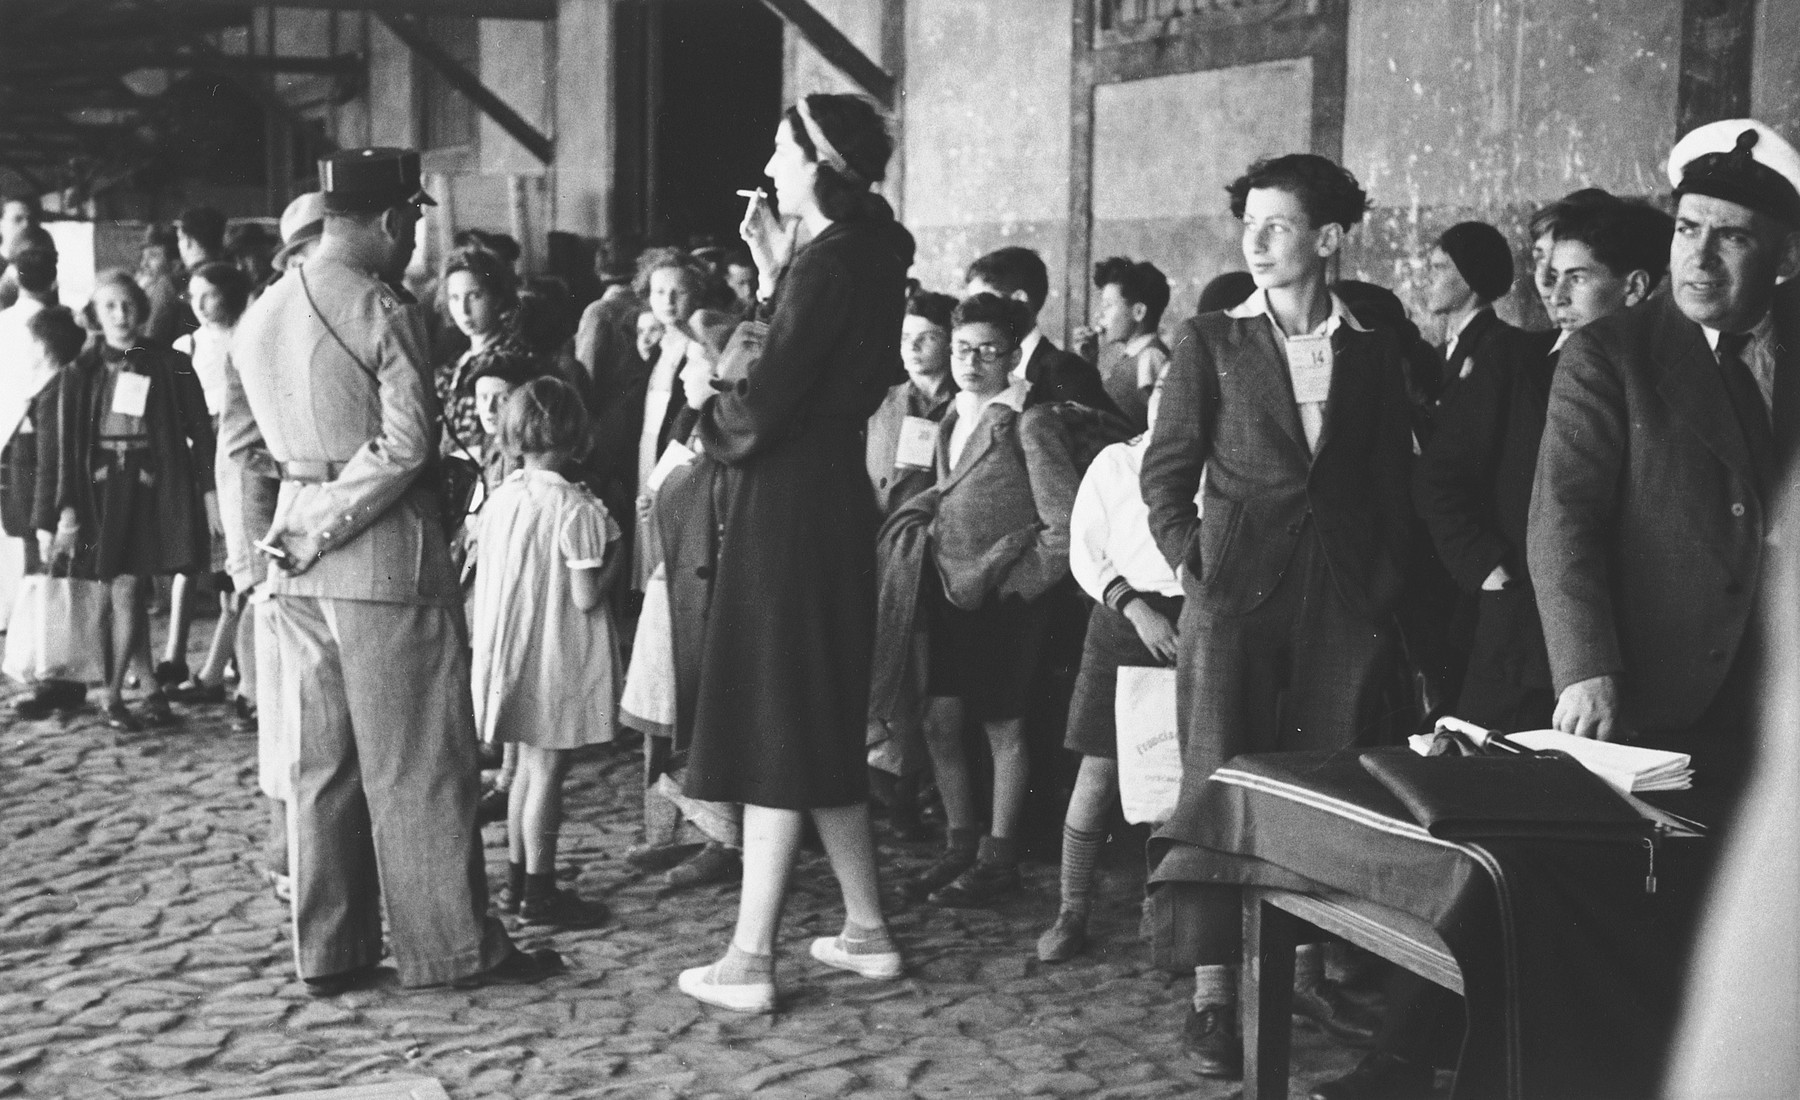 A group of Jewish refugee children wait in the port of Lisbon to board the SS Mouzinho.

On the right side of the photo a young man is wearing a tag clearly legible as #14. This is Guenther Sinasohn born 29 October 1926 in Germany. There was also a Herbert Schwartz (born 16 May 1925) on this transport who may have been Guenther's brother.The young blonde girl on the far left of the image is wearing tag #25, and can be identified as Lilian Warschawski (or Warszawski), born 20 April 1930 in Belgium.  In the middle of the photograph the young boy wearing what appears to be ID tag #23 is Oswald Kernberg, born 19 October 1929 in Vienna.  Pictured in the back, fourth from the right in profile is  Alexander Ssascha Britan. The tall woman smoking a cigarette might be Ursula Gajewska, who was the adult escort on this transport. Ursula was an American citizen, born 1908 in Buffalo, NY, who was fleeing Poland herself.